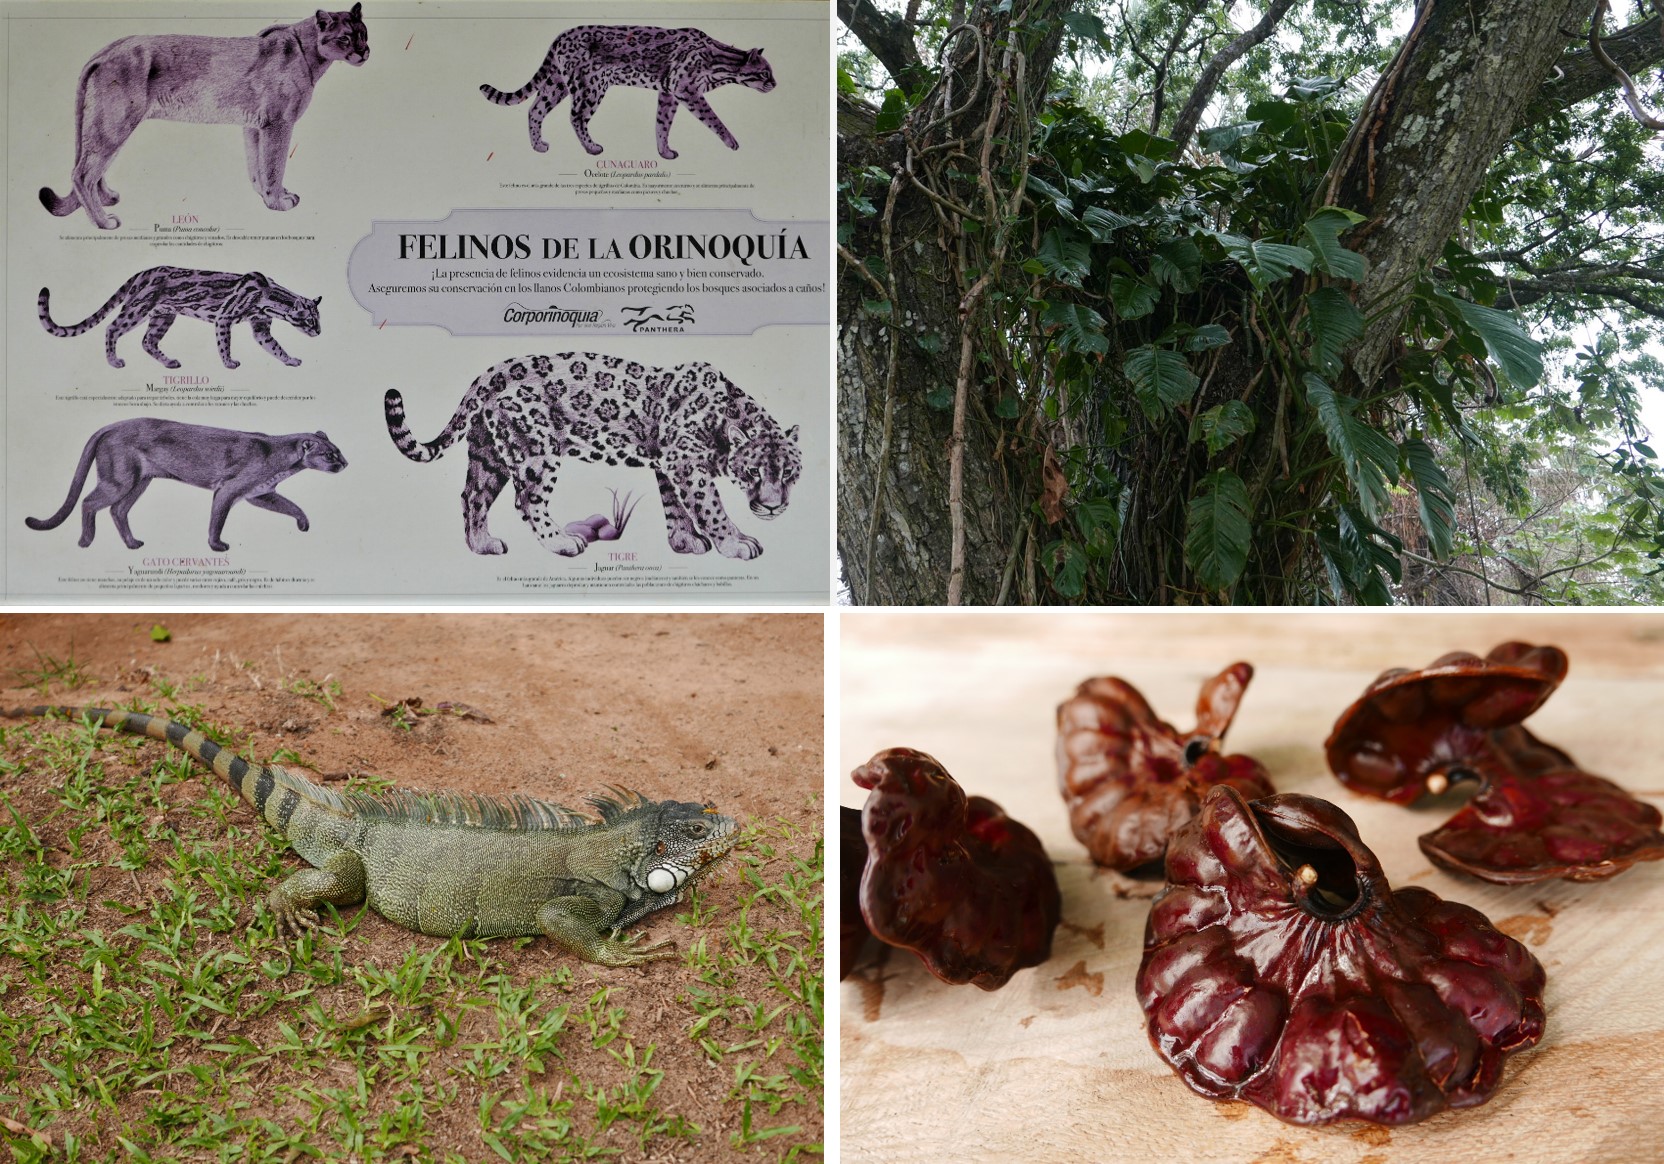 Big cats you might see, if you are very lucky, and an iguana (which you will see). Trees and  the varied acacia seed pods are amazing here too.